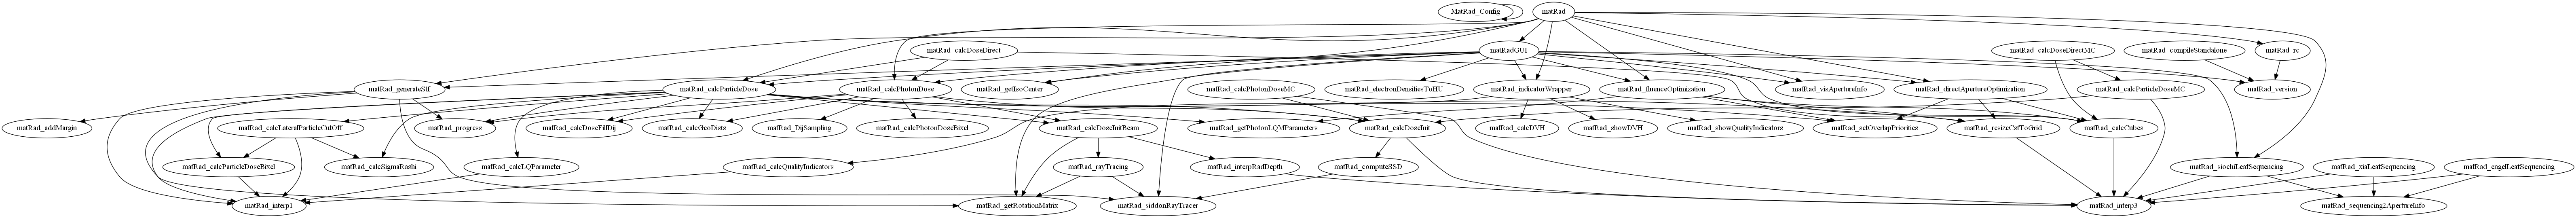 Dependency Graph for matRad